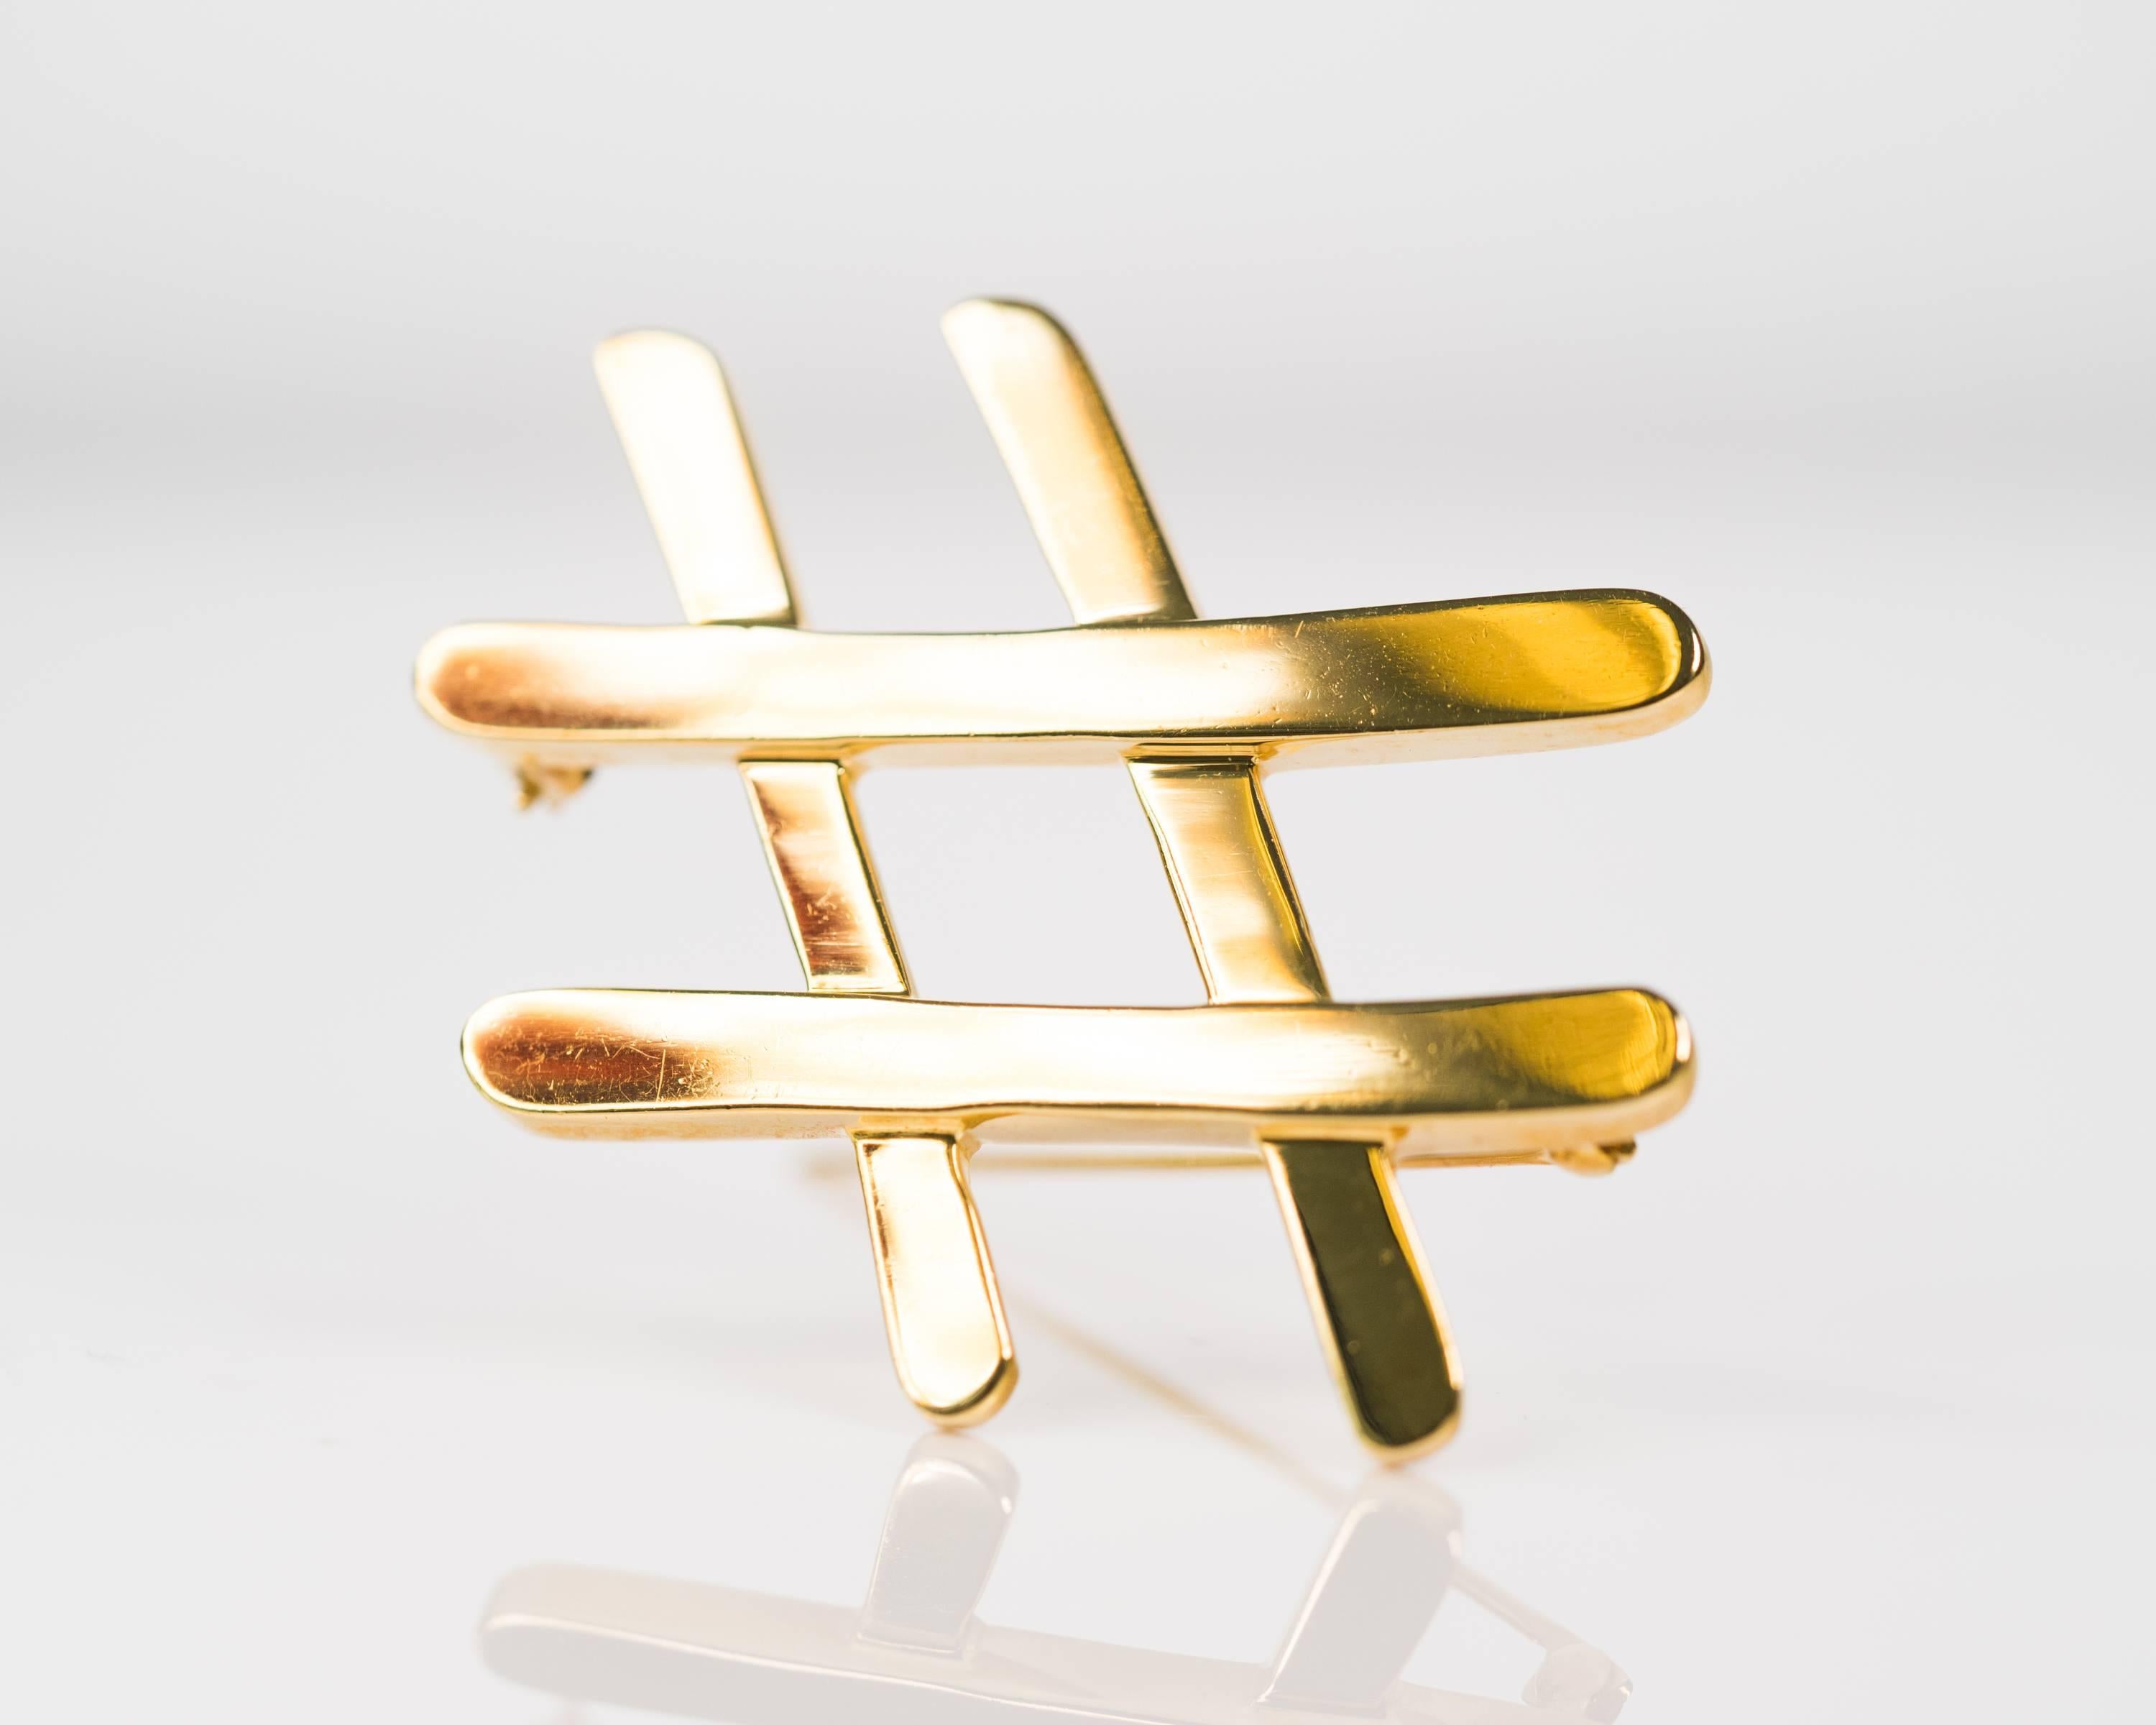 Paloma Picasso for Tiffany and Co. Hashtag Pin Brooch - 18 Karat Yellow Gold

Hashtag Brooch in 18 Karat Yellow Gold! 
High polish, rich Gold Hashtag Pin measures approximately 1.75 inches wide x 1.75 inches long.
Designed by Paloma Picasso, this